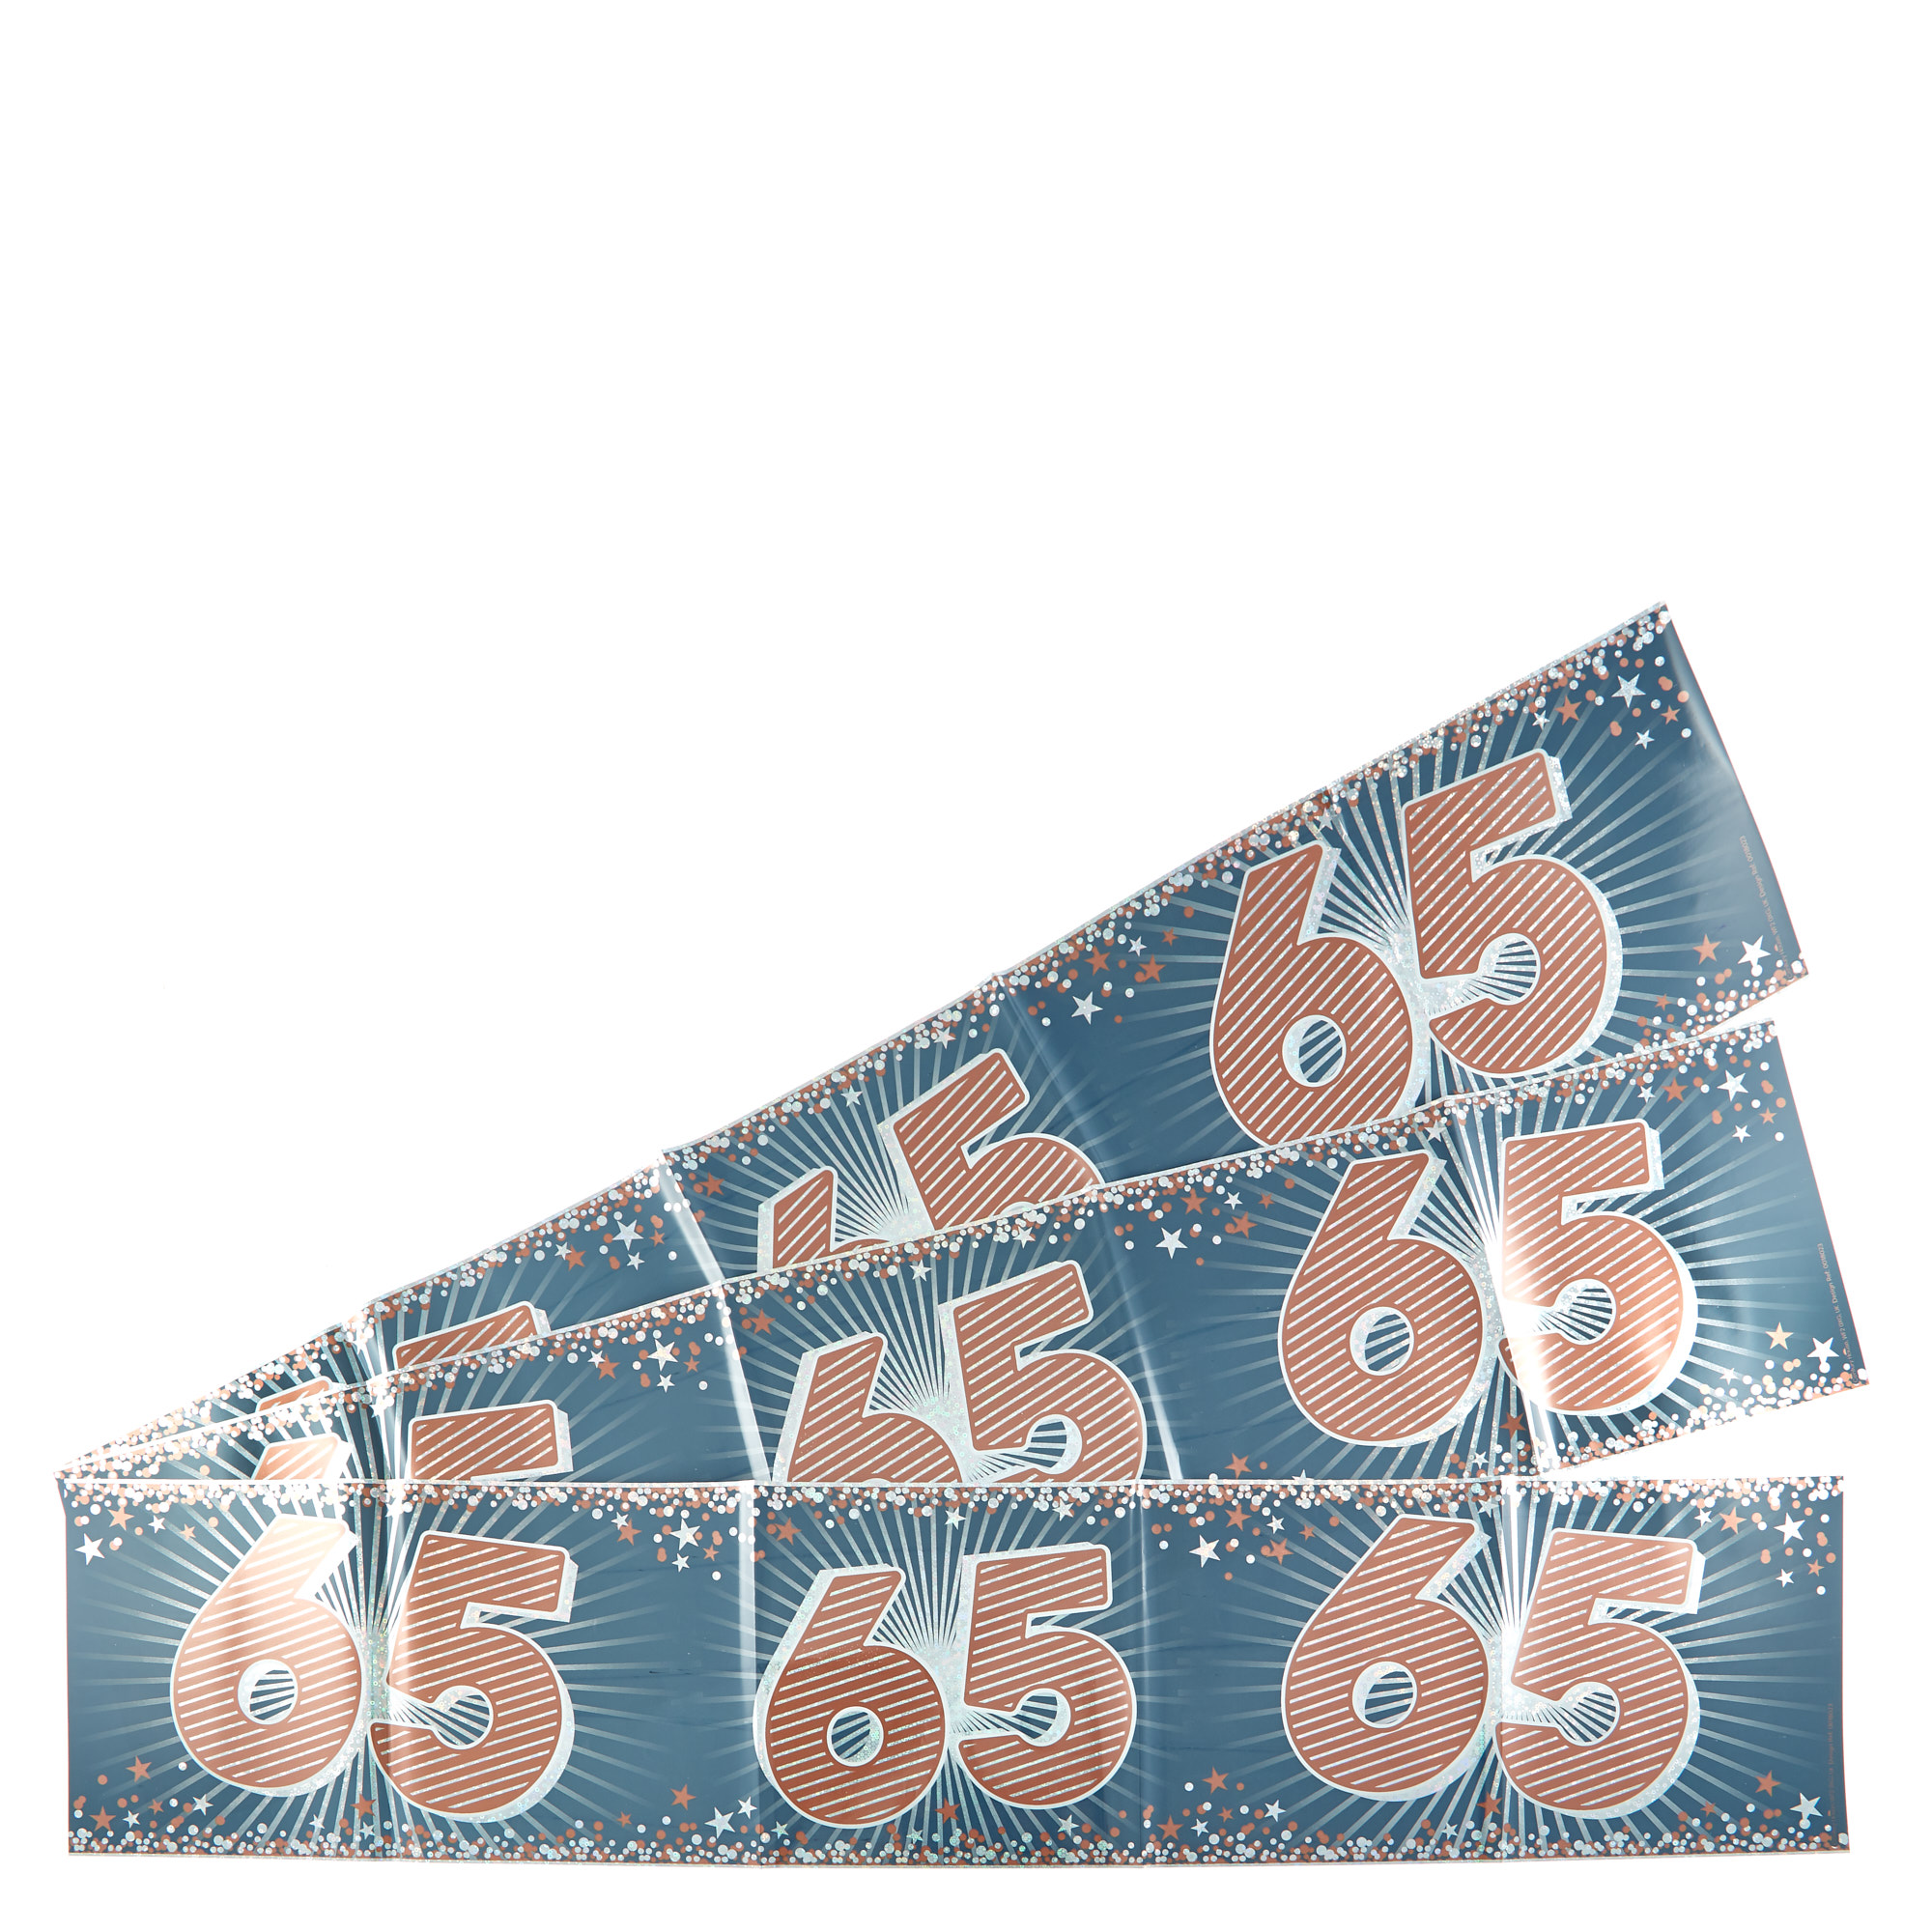 Holographic 65th Birthday Party Banners - Pack Of 3 